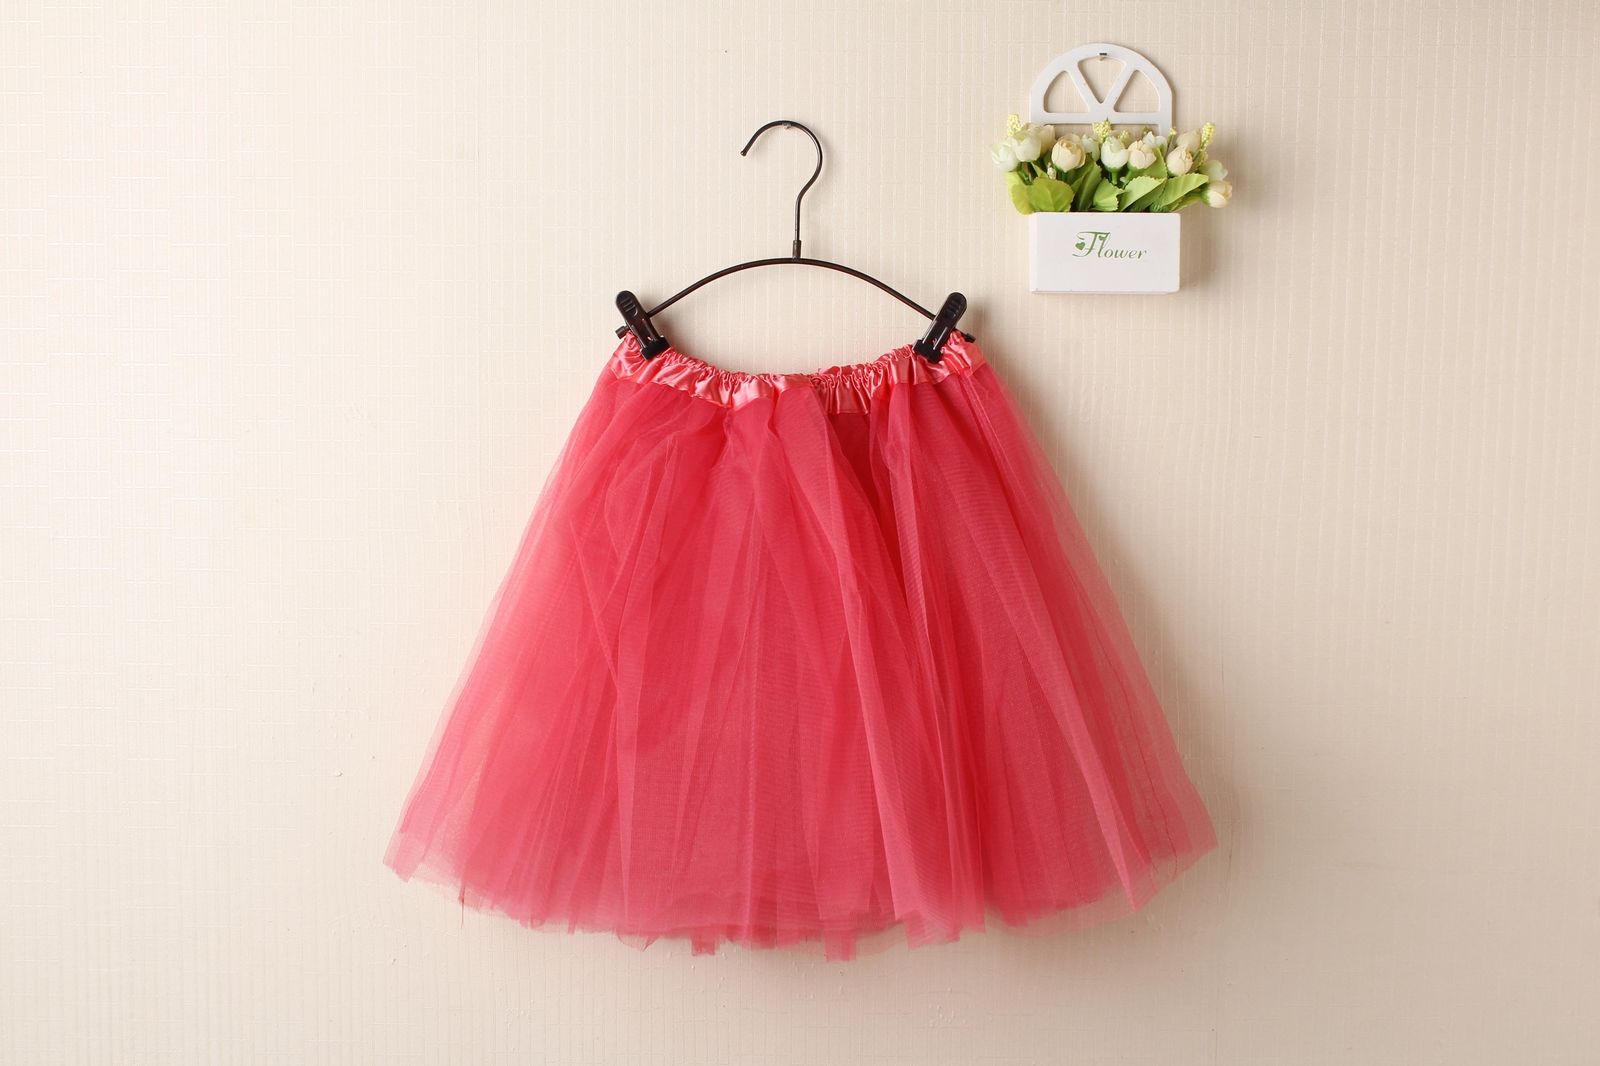 New Adults Tulle Tutu Skirt Dressup Party Costume Ballet Womens Girls Dance Wear, Watermelon Red, Adults